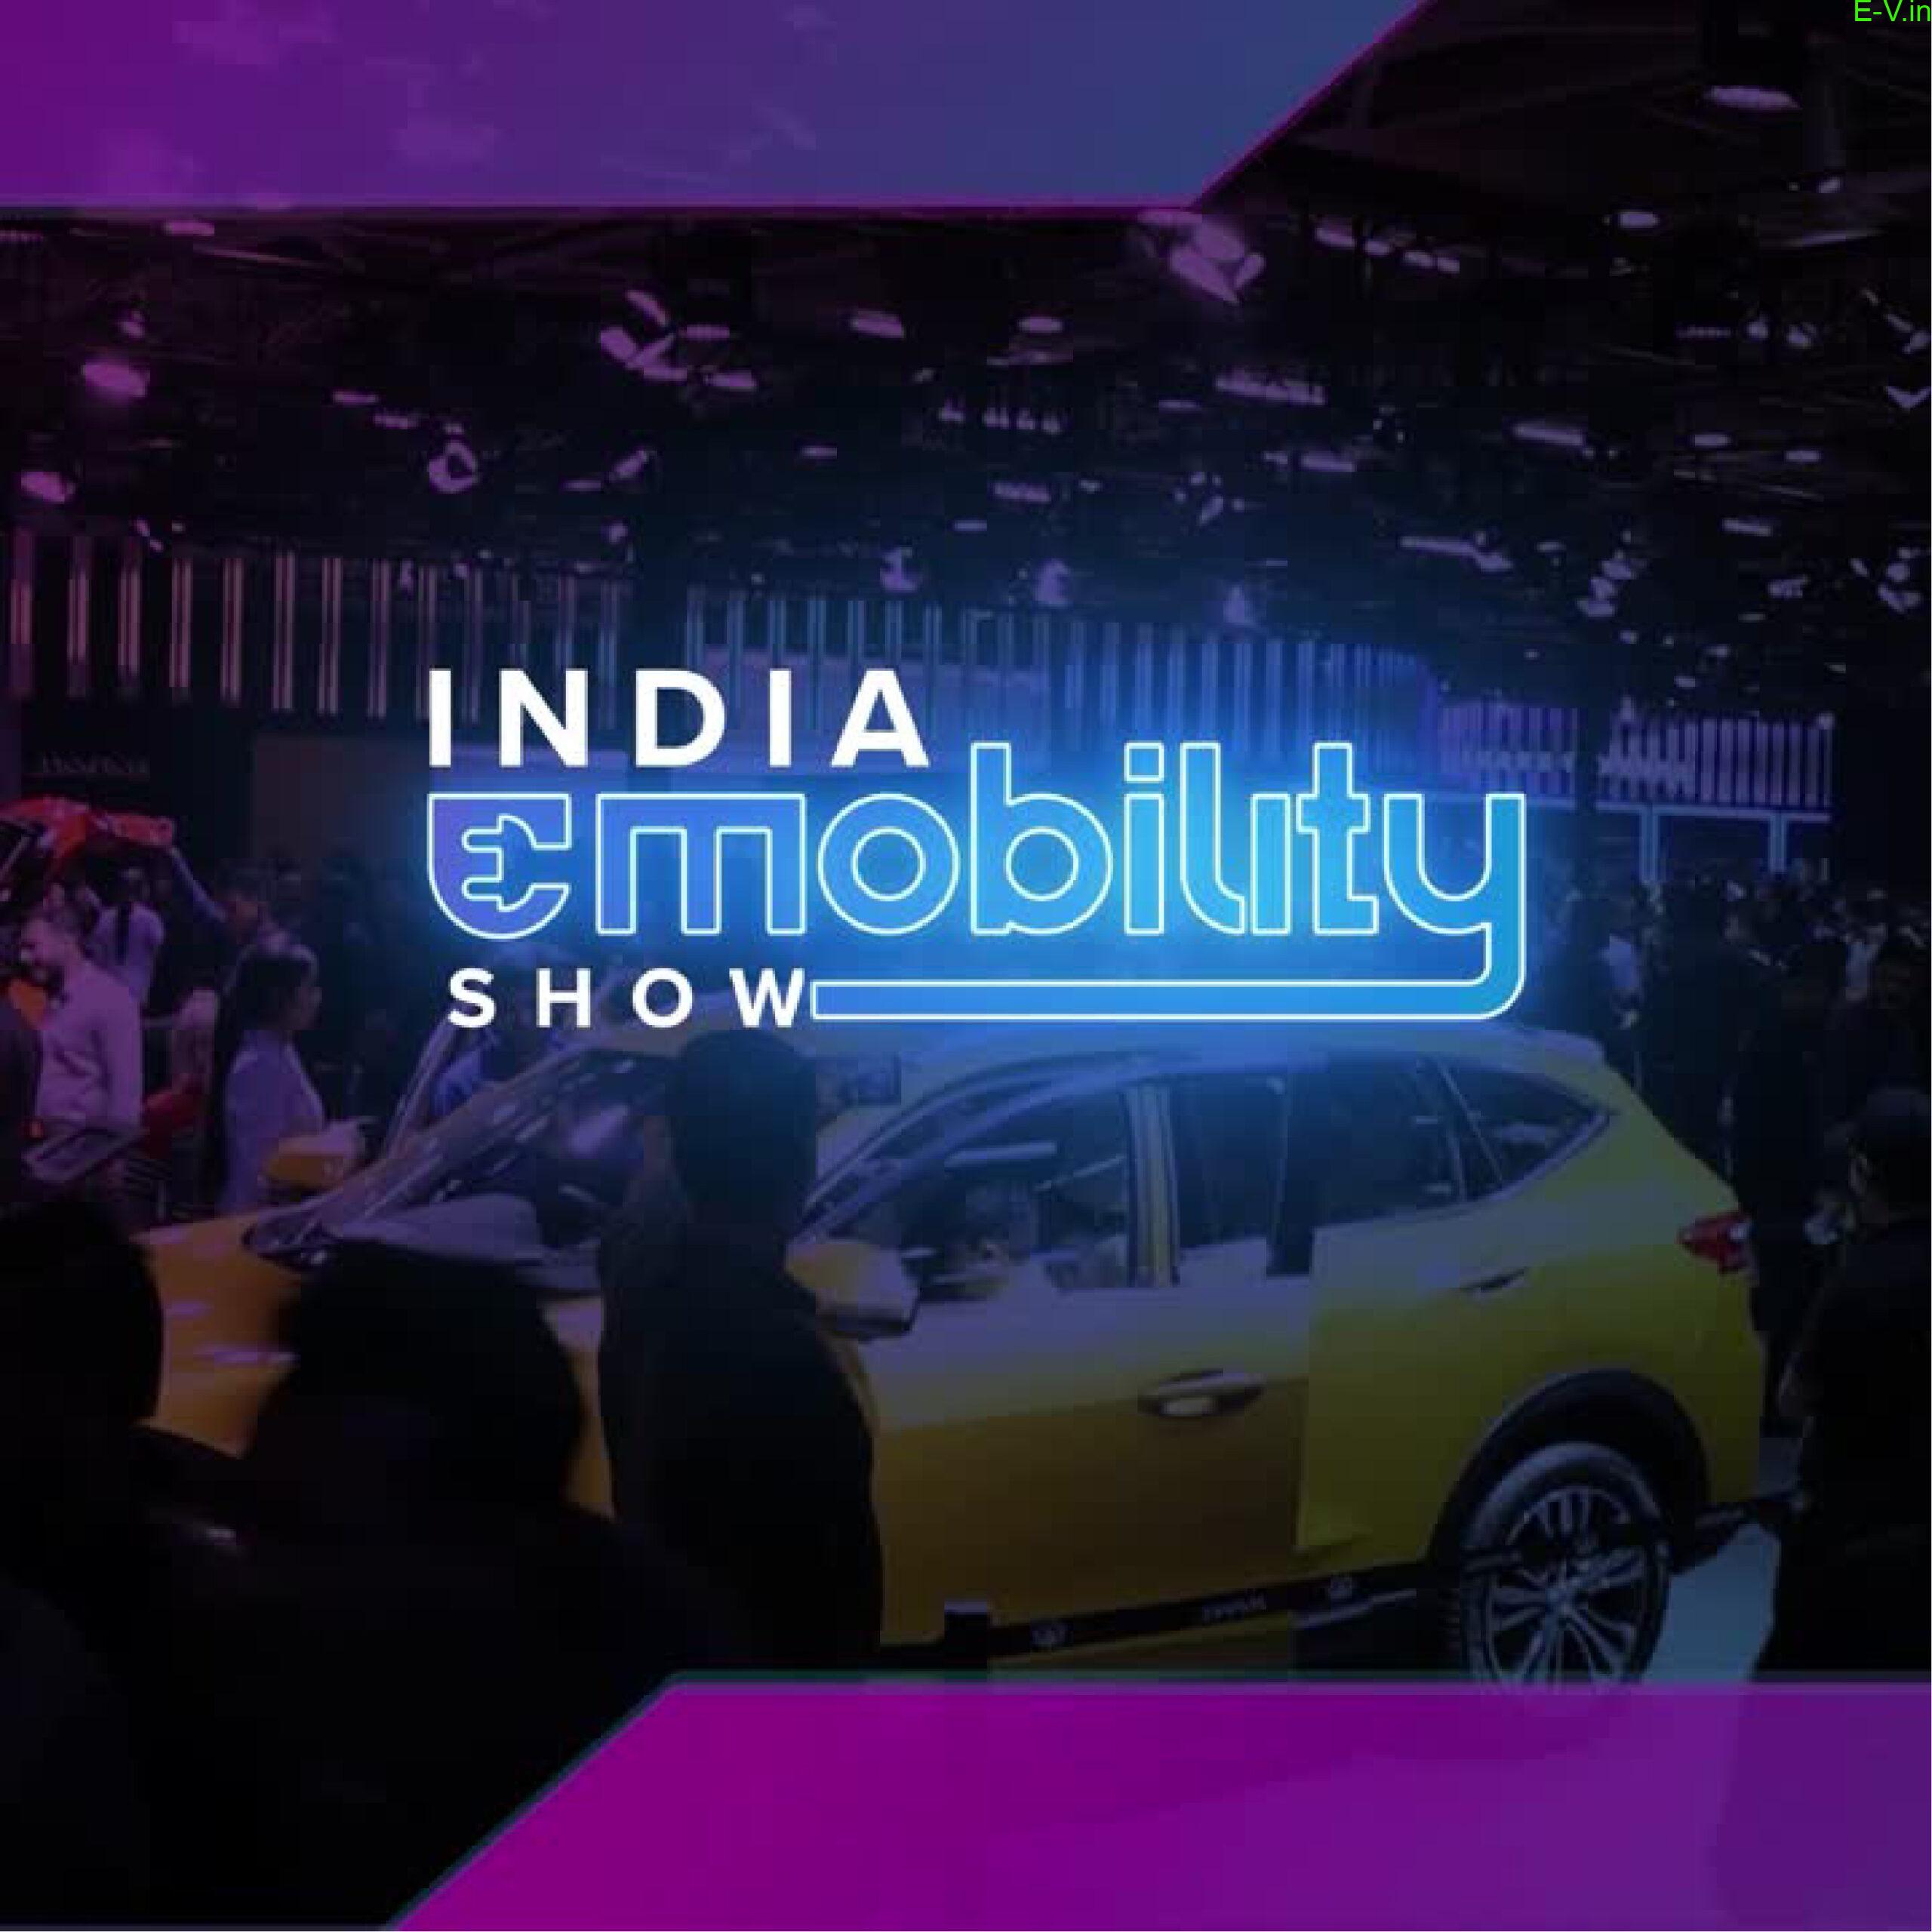 India E-Mobility Show is just one week away, and the countdown has begun